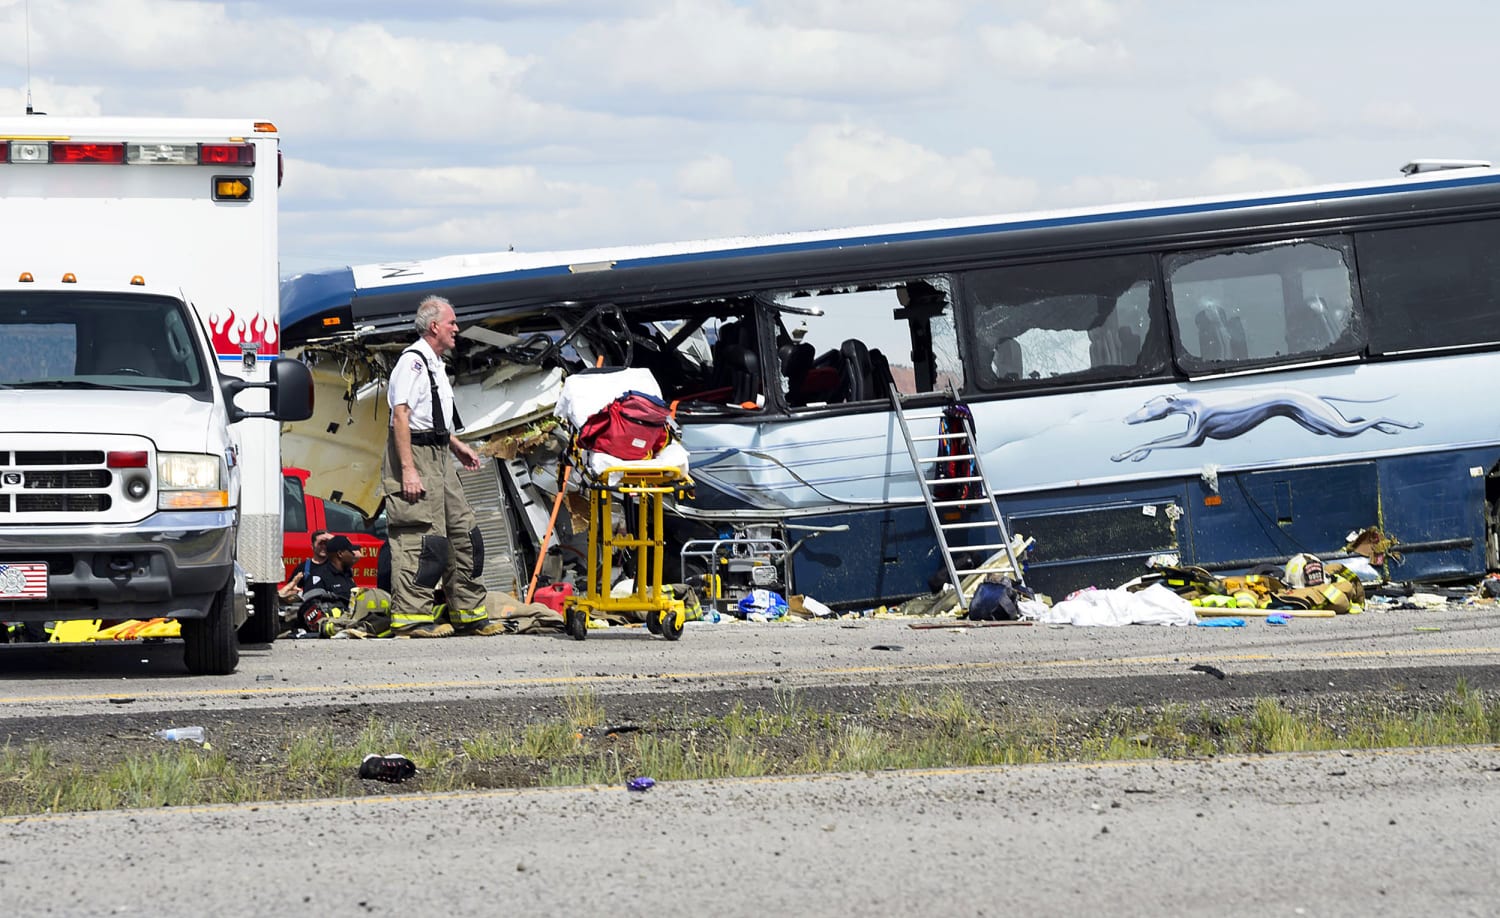 Electronic recorders recovered in New Mexico truck-bus crash that killed 8.